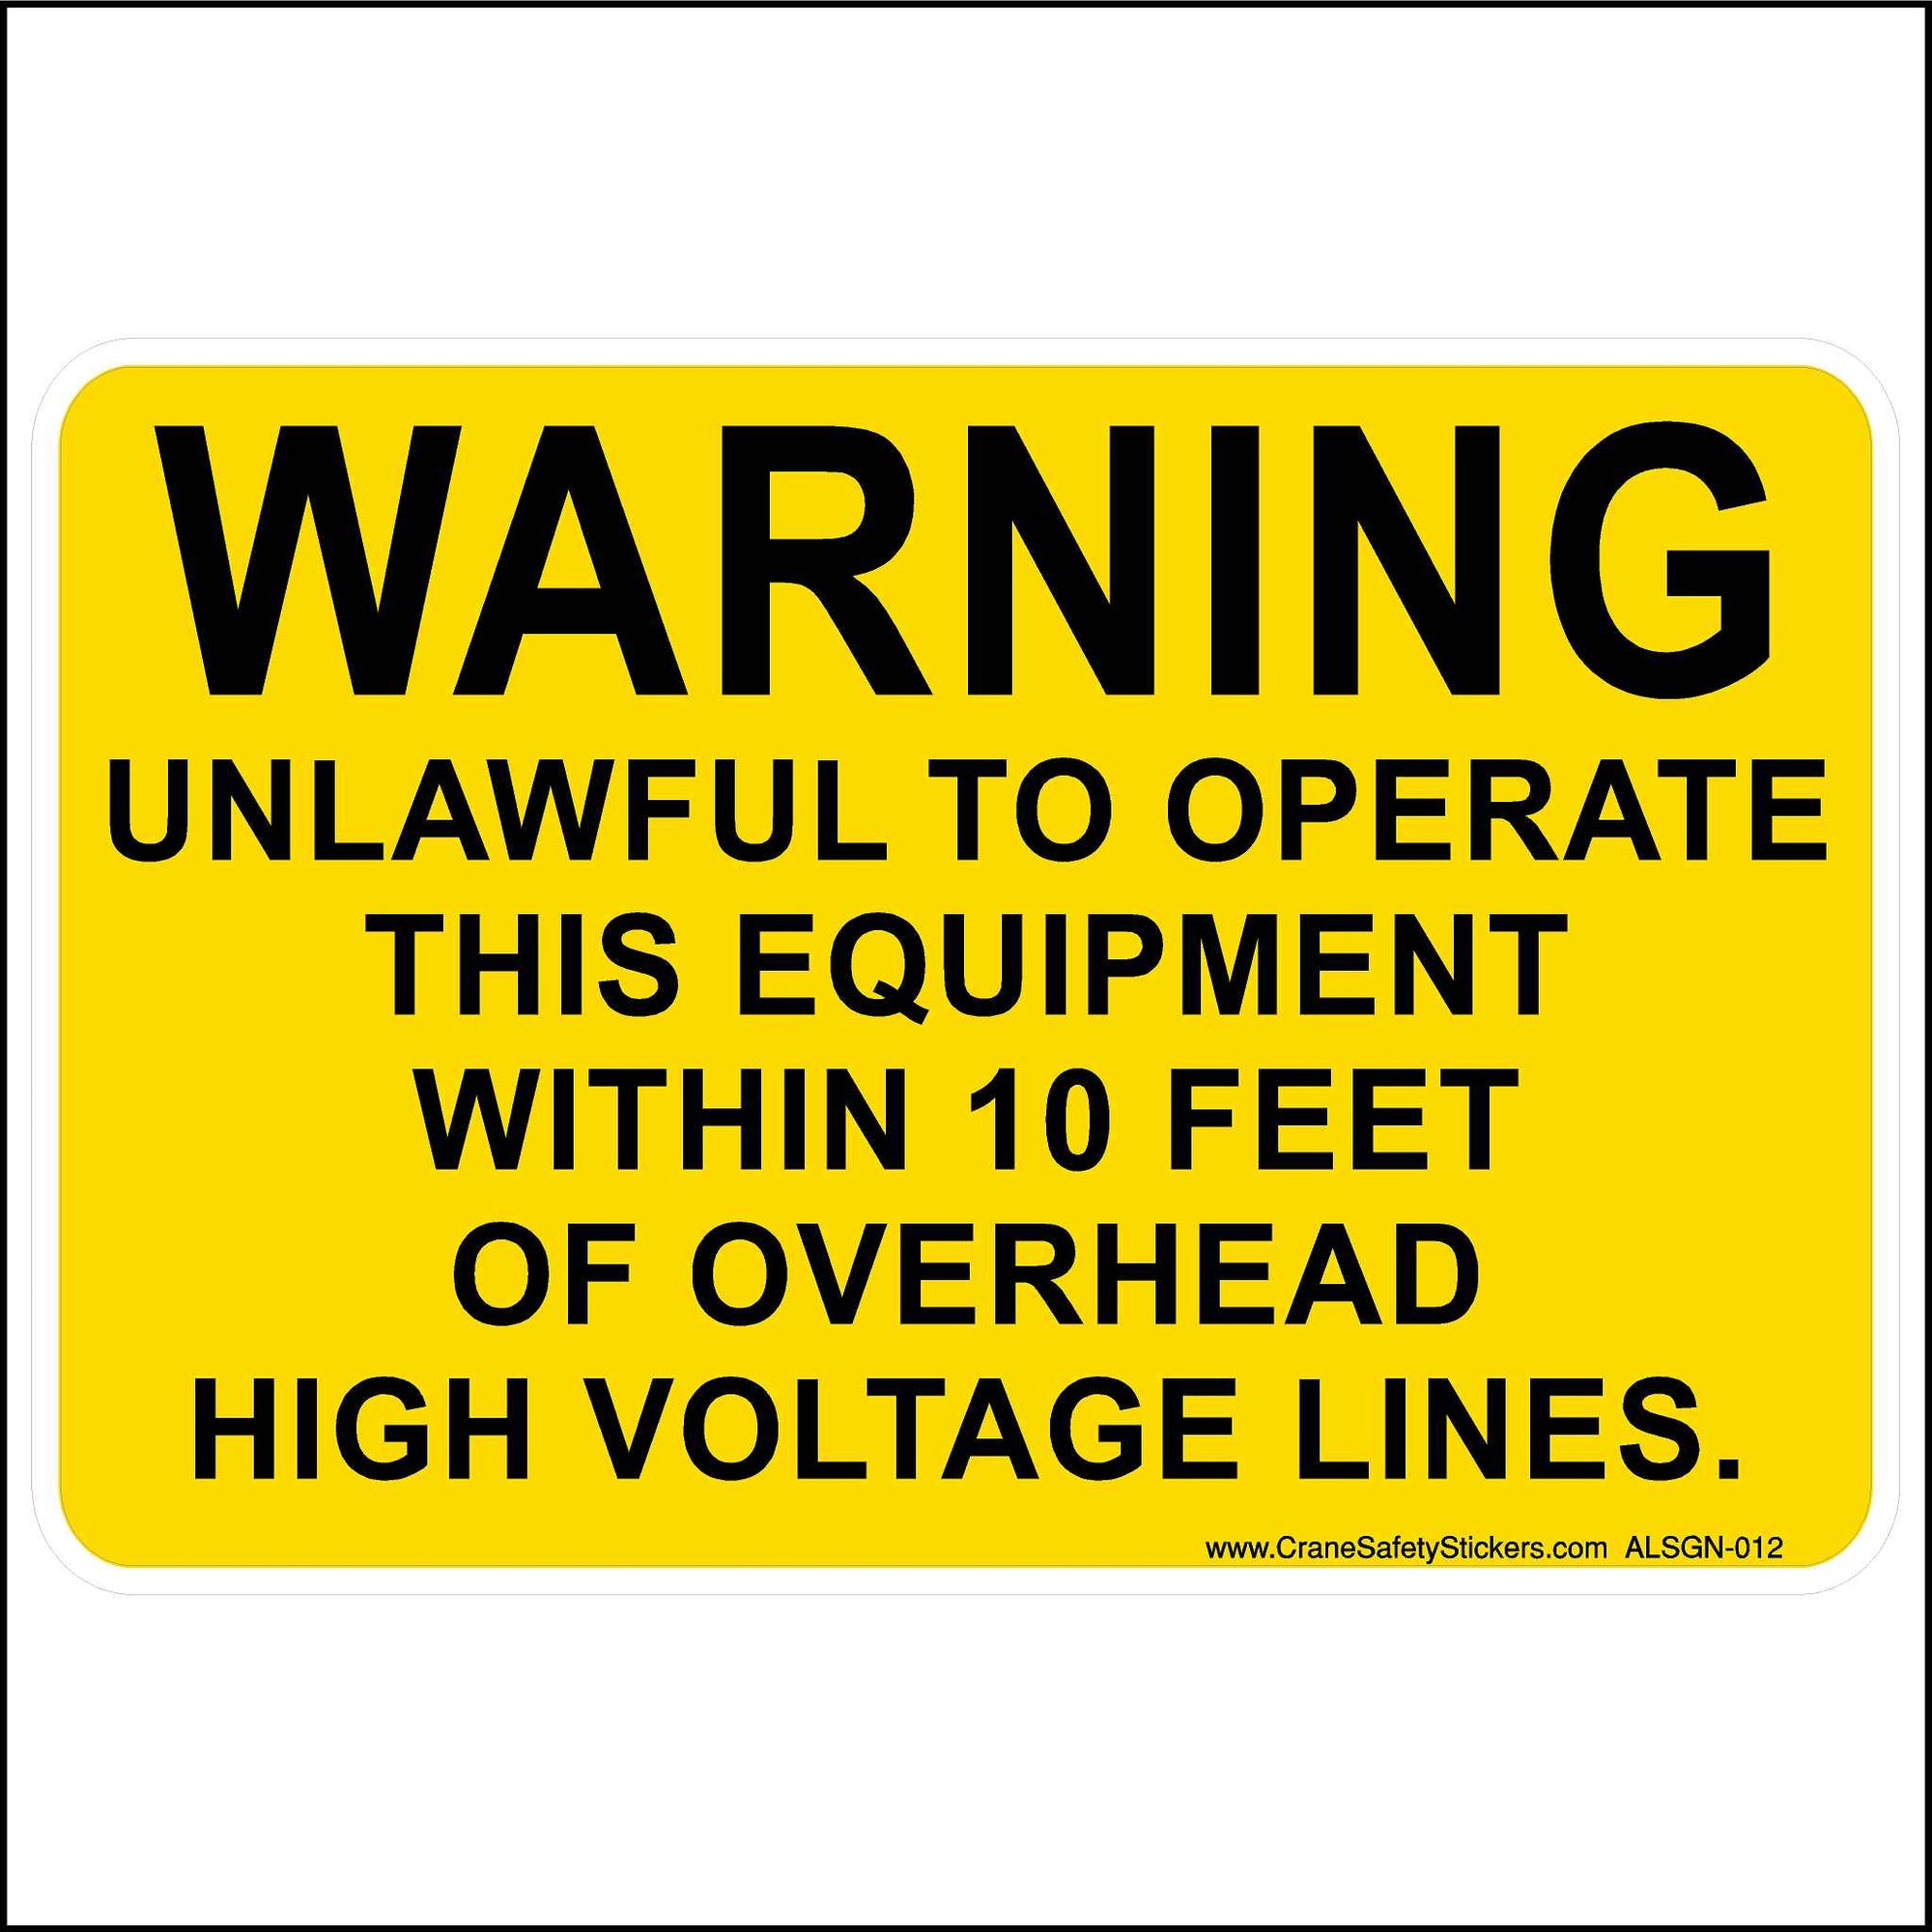 ANSI Yellow sign with Black letters reading, Warning unlawful to operate this equipment within 10 feet of overhead high voltage lines.